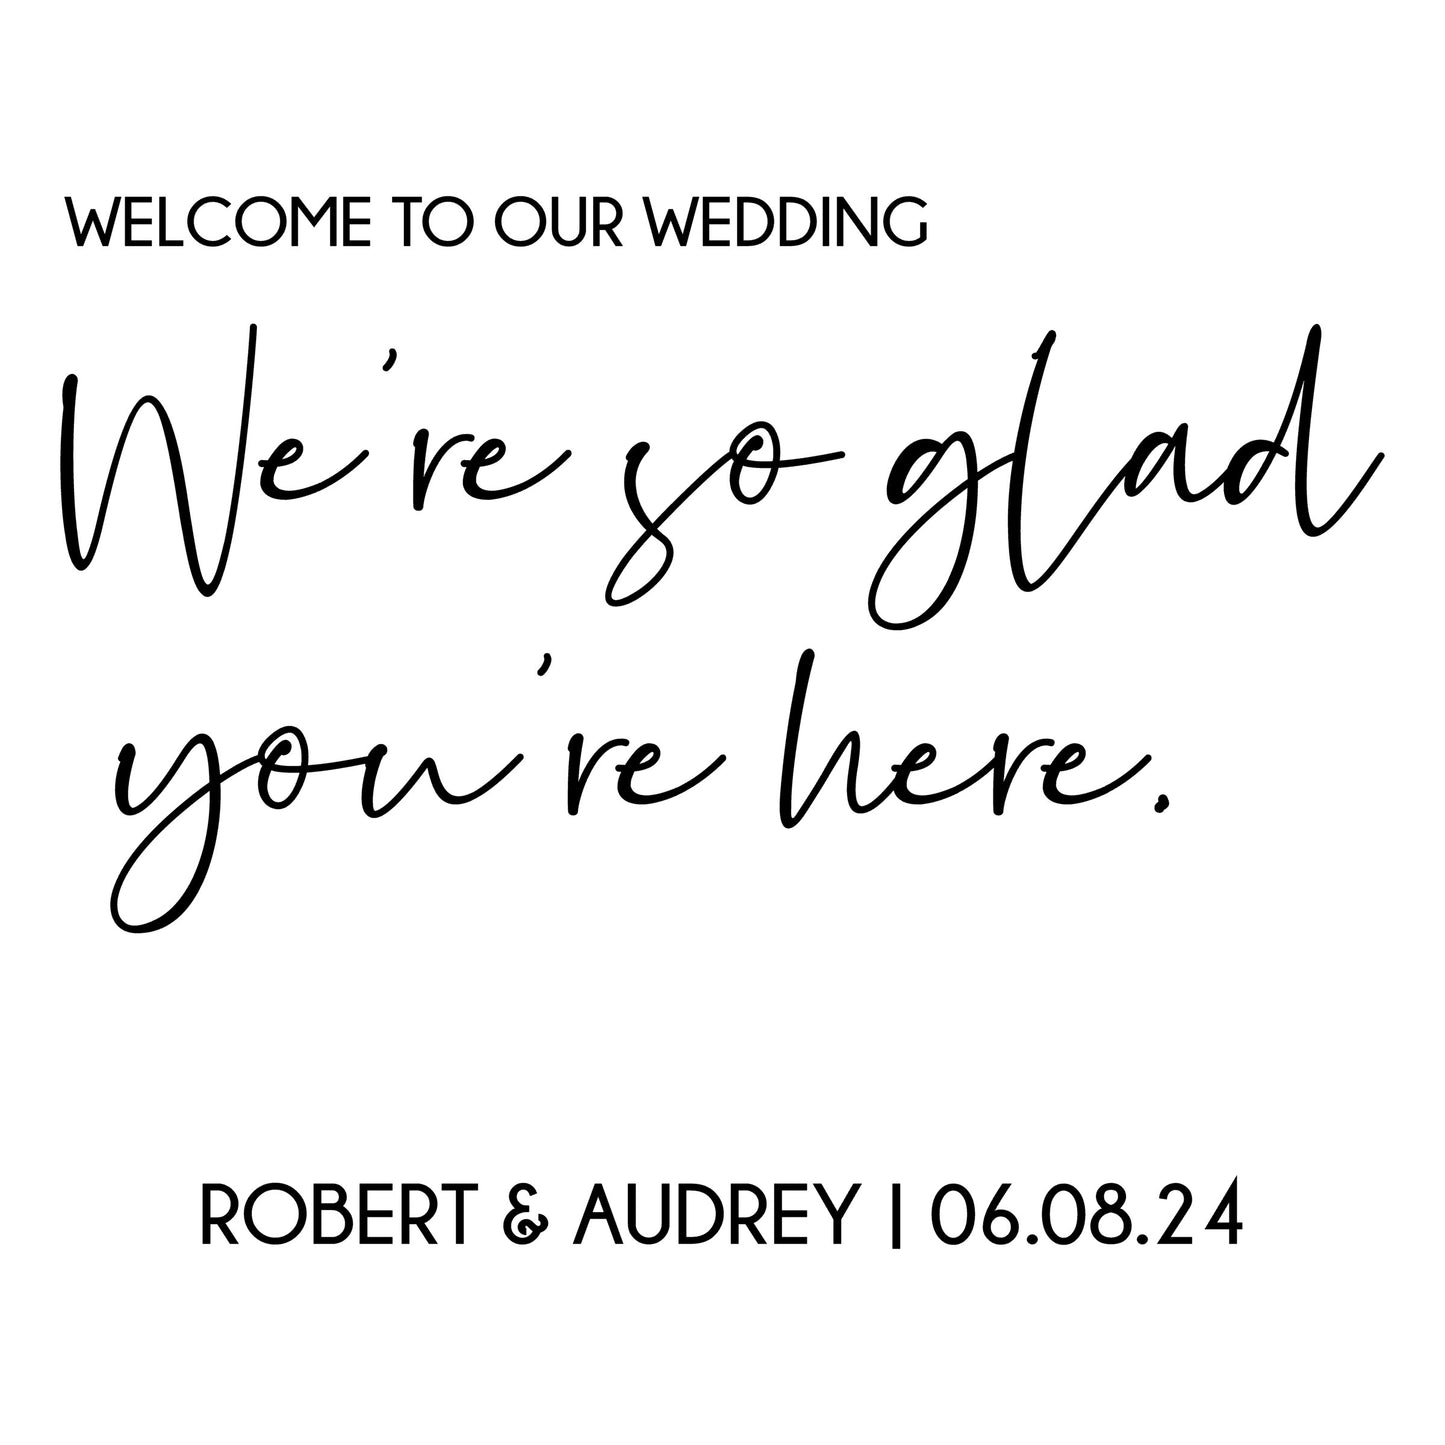 We're So Glad You're Here Wedding Flower Box Sign Decal